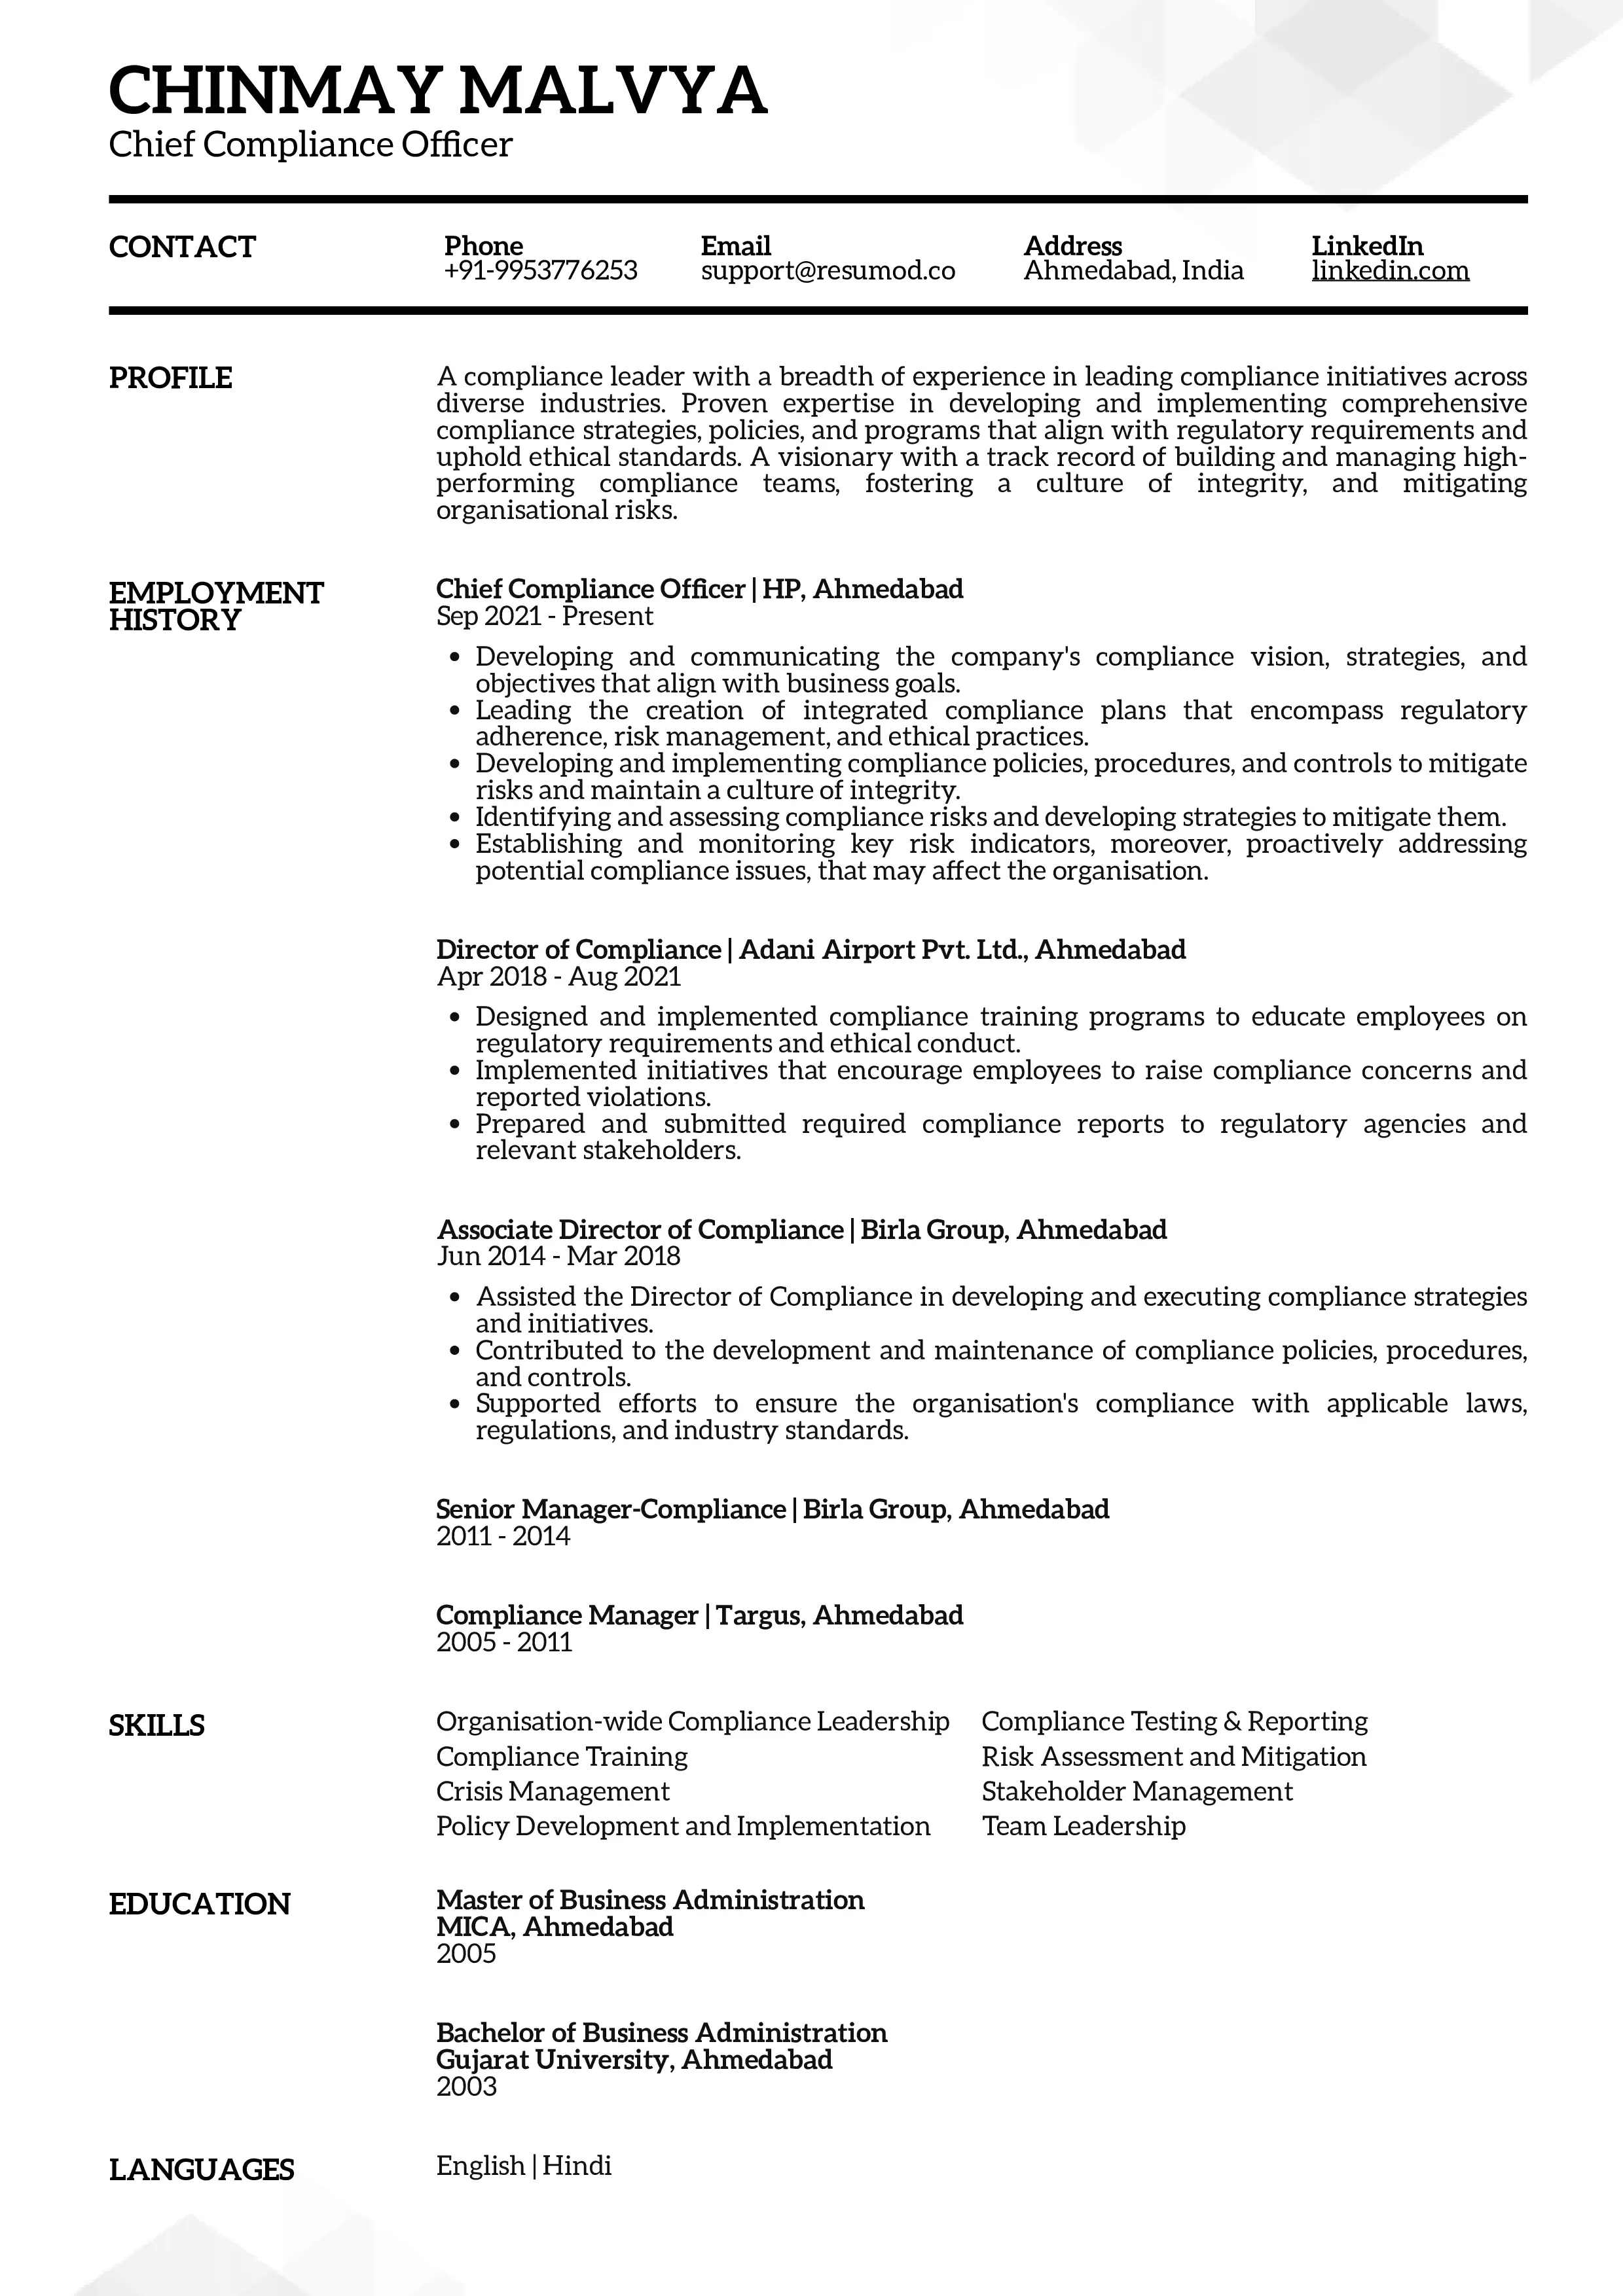 Sample Resume of Chief Compliance Officer | Free Resume Templates & Samples on Resumod.co